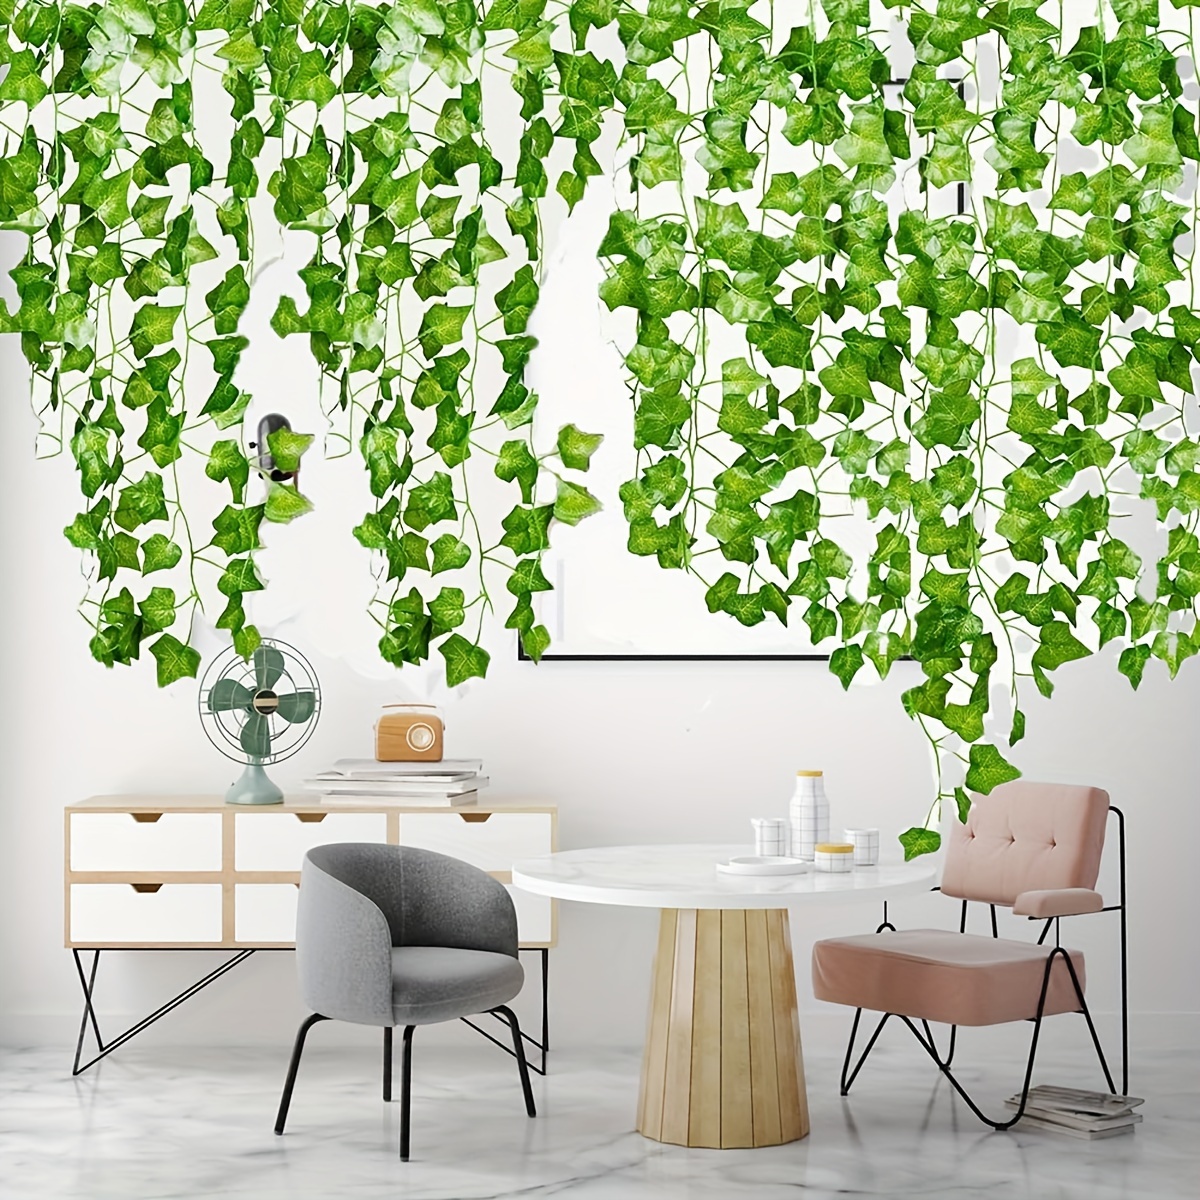 Artificial Plants Party Supplies Vine Leaves Ratten Hanging Ivy Fake Vine  Plants Wall Creeper Wedding Home Garden Decoration Grape Ratten Leave  20220110 Q2 From Sd007, $4.04